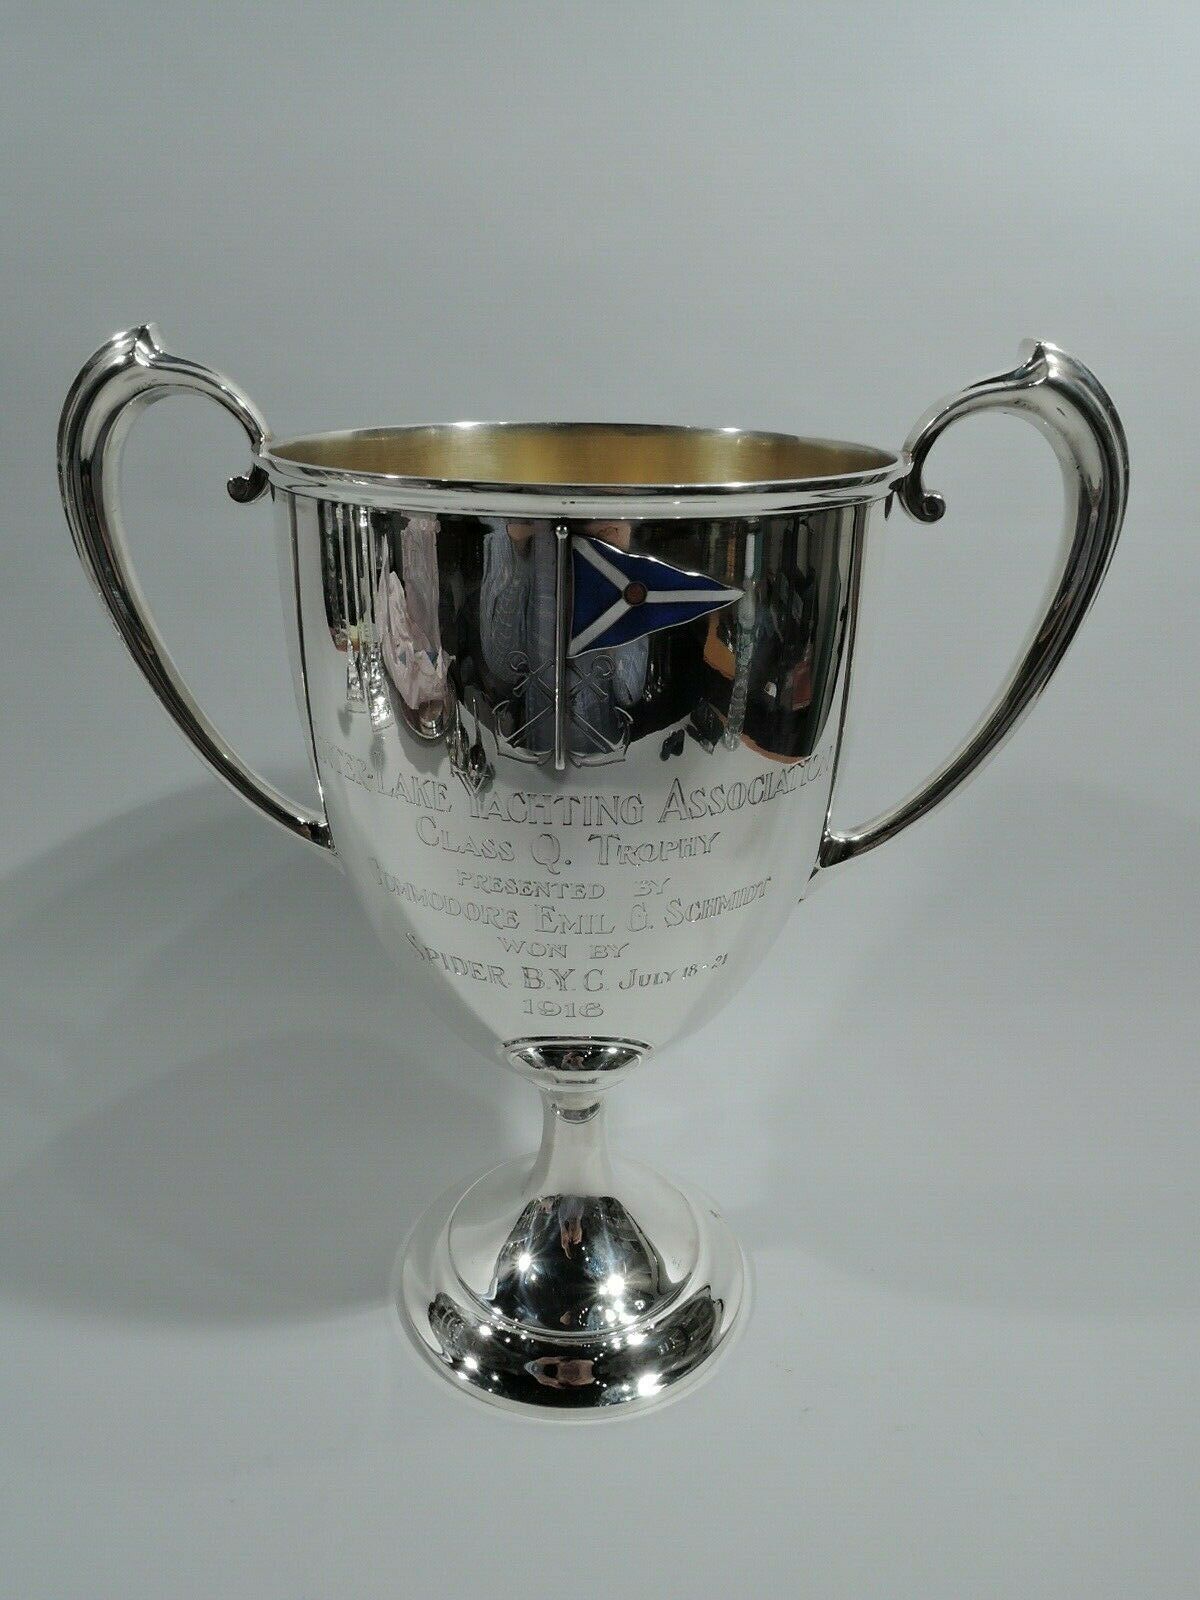 Gorham Trophy Cup - Inter Lake Yachting Assoc. - American Sterling Silver Enamel